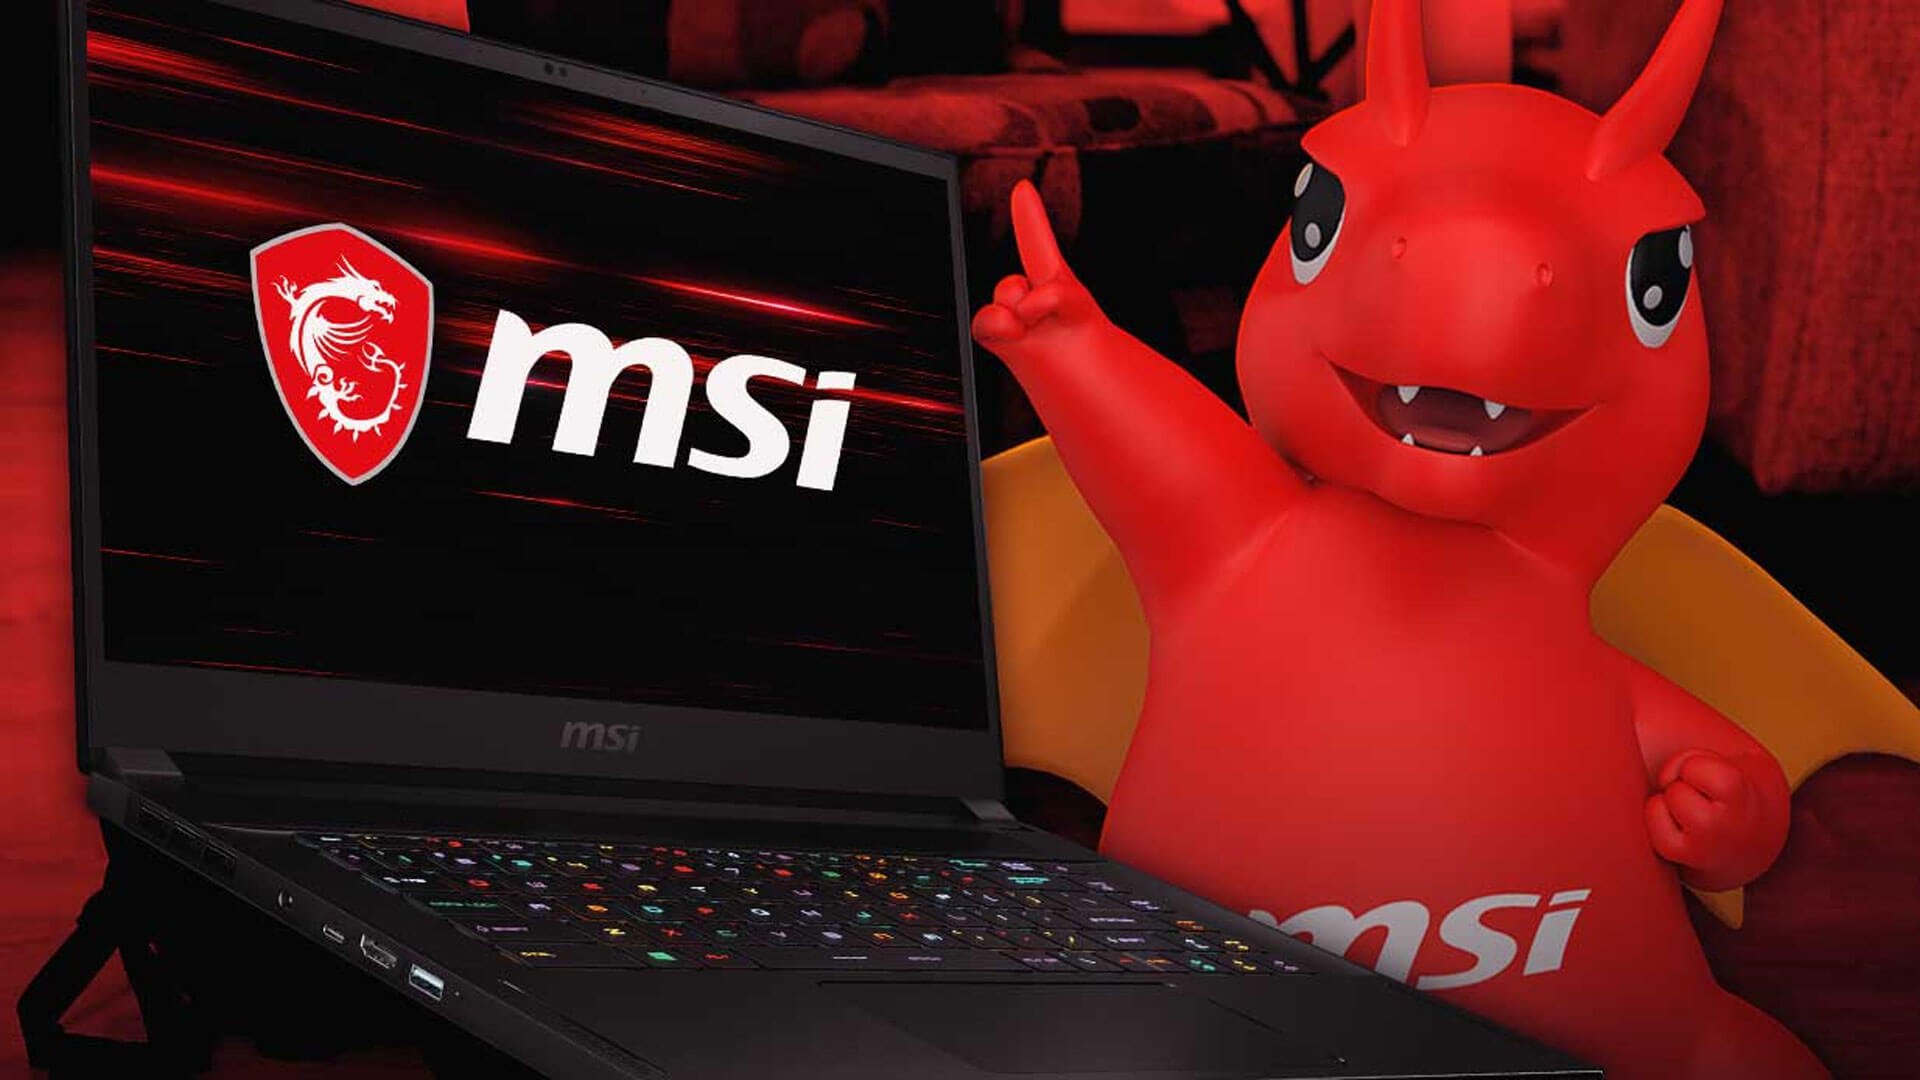 MSI Product Launch Event Casestudy Background